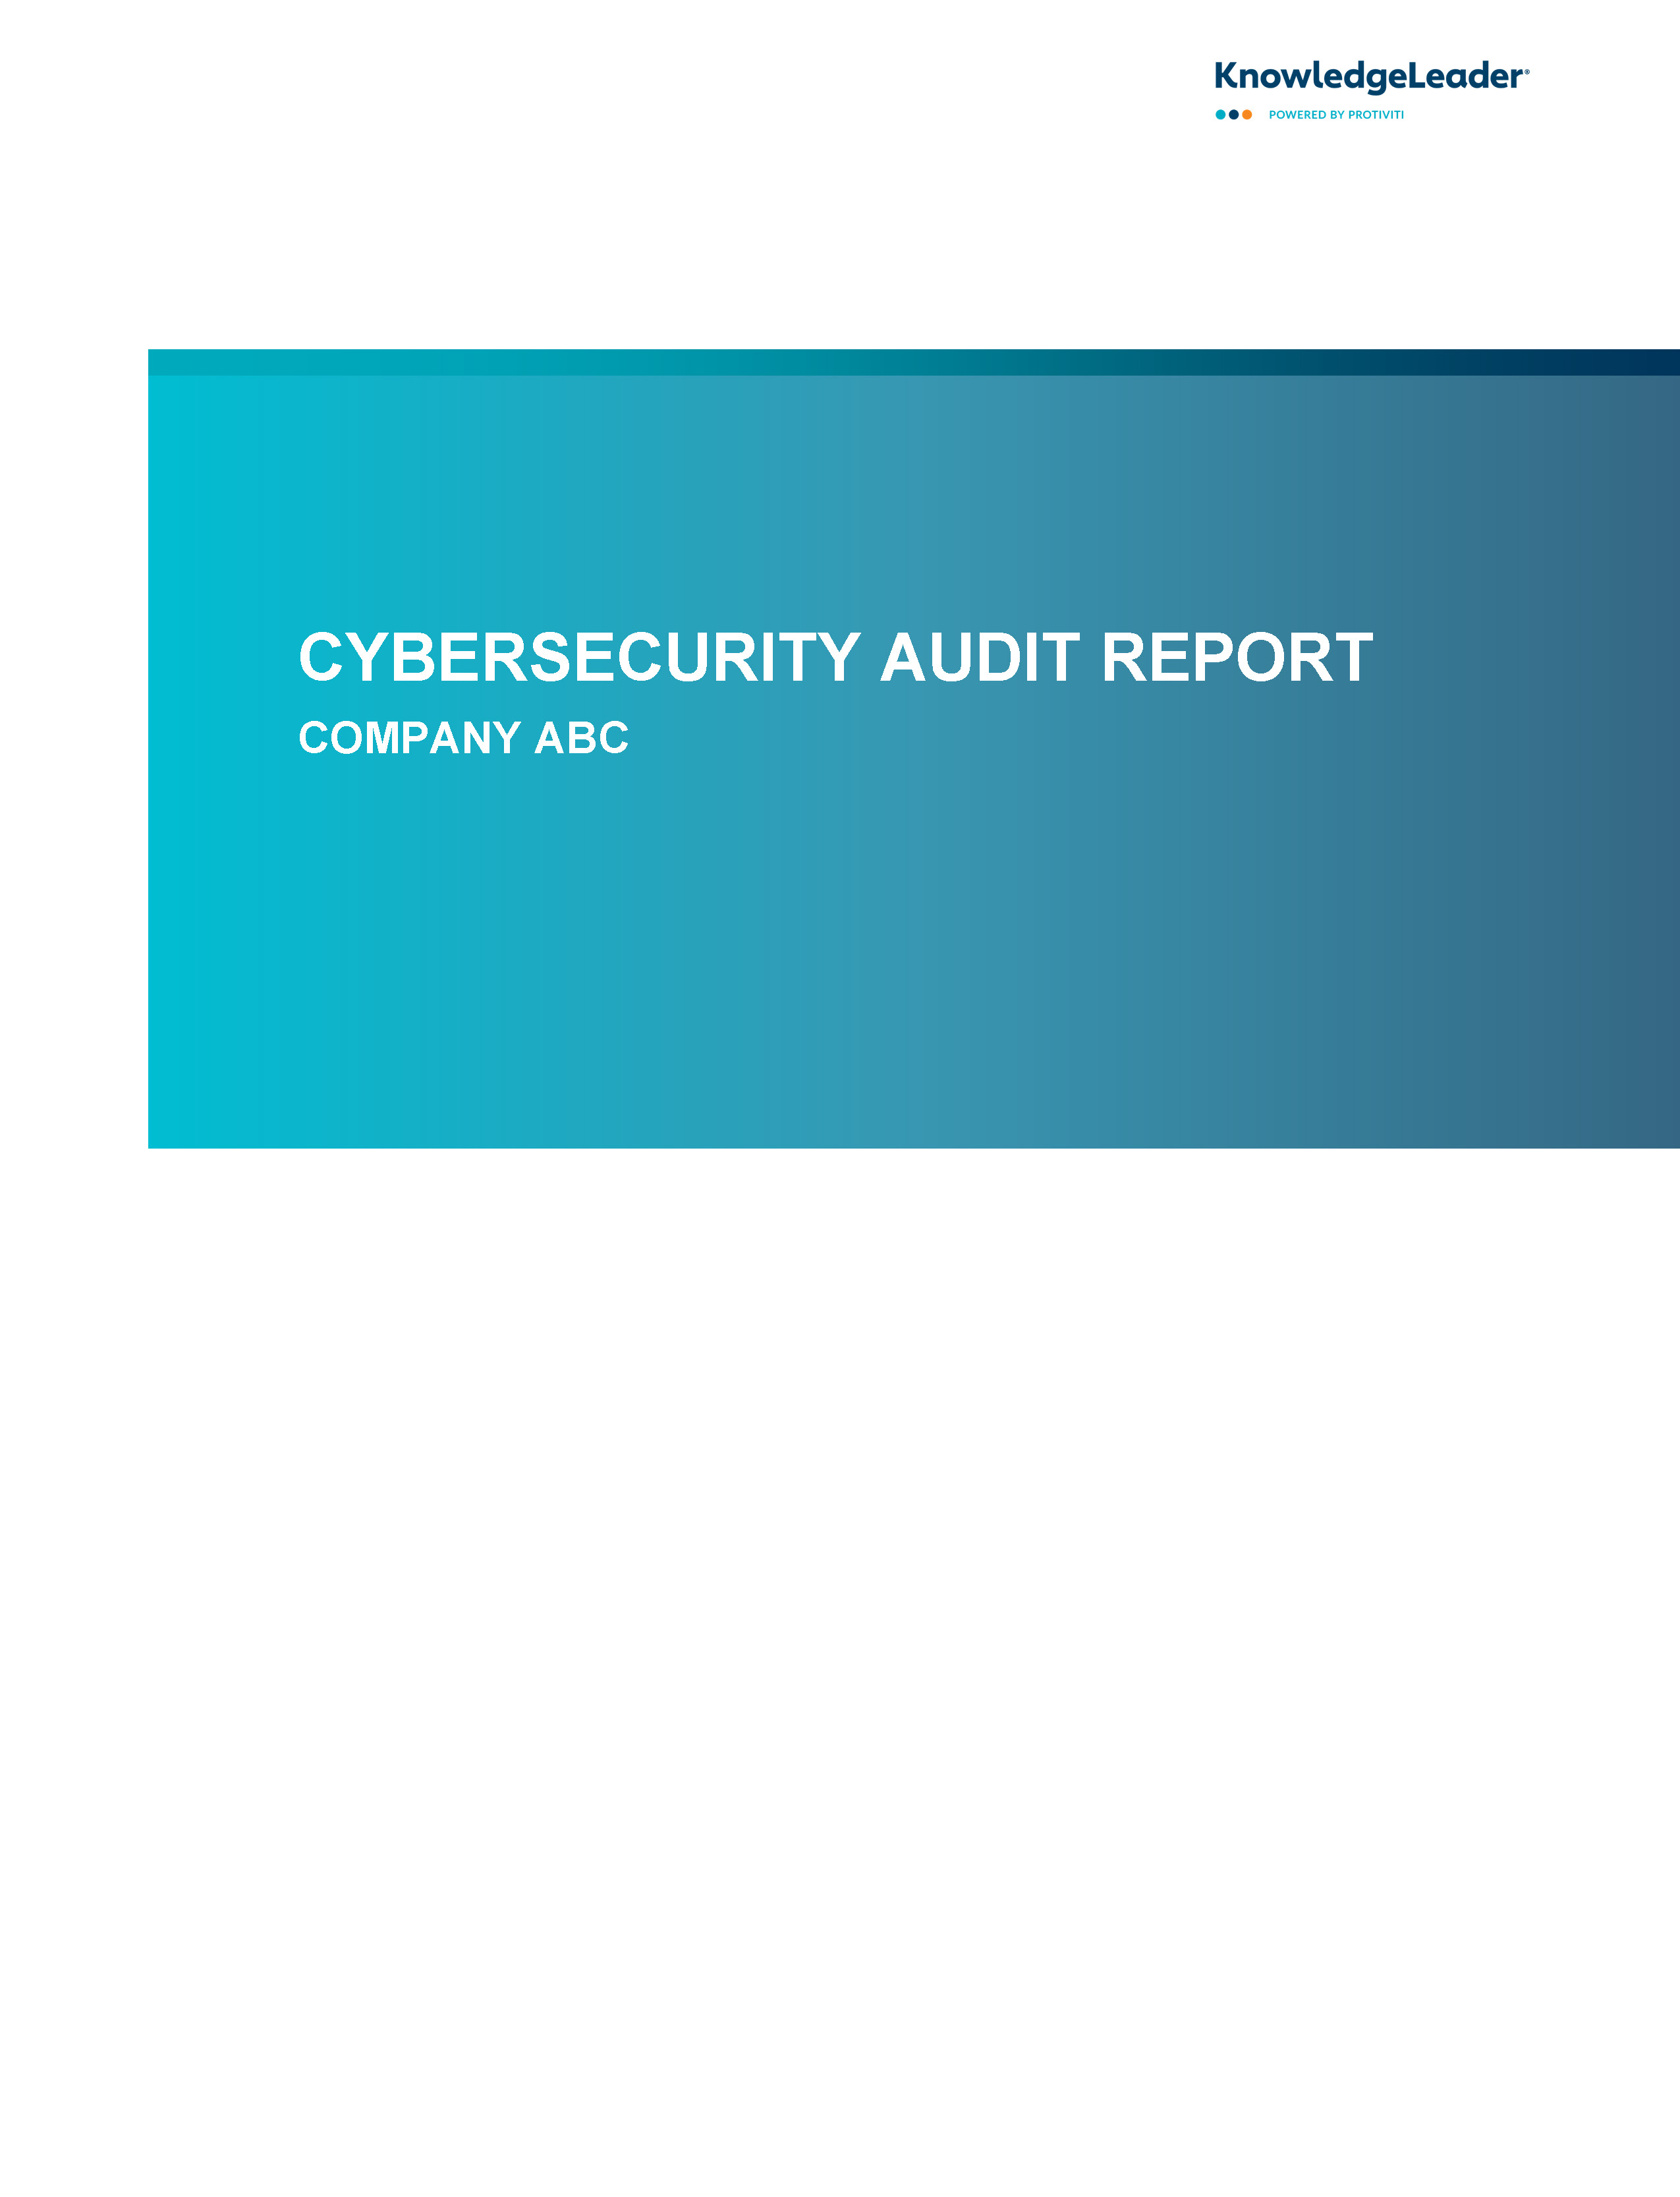 Screenshot of the first page of Cybersecurity Audit Report